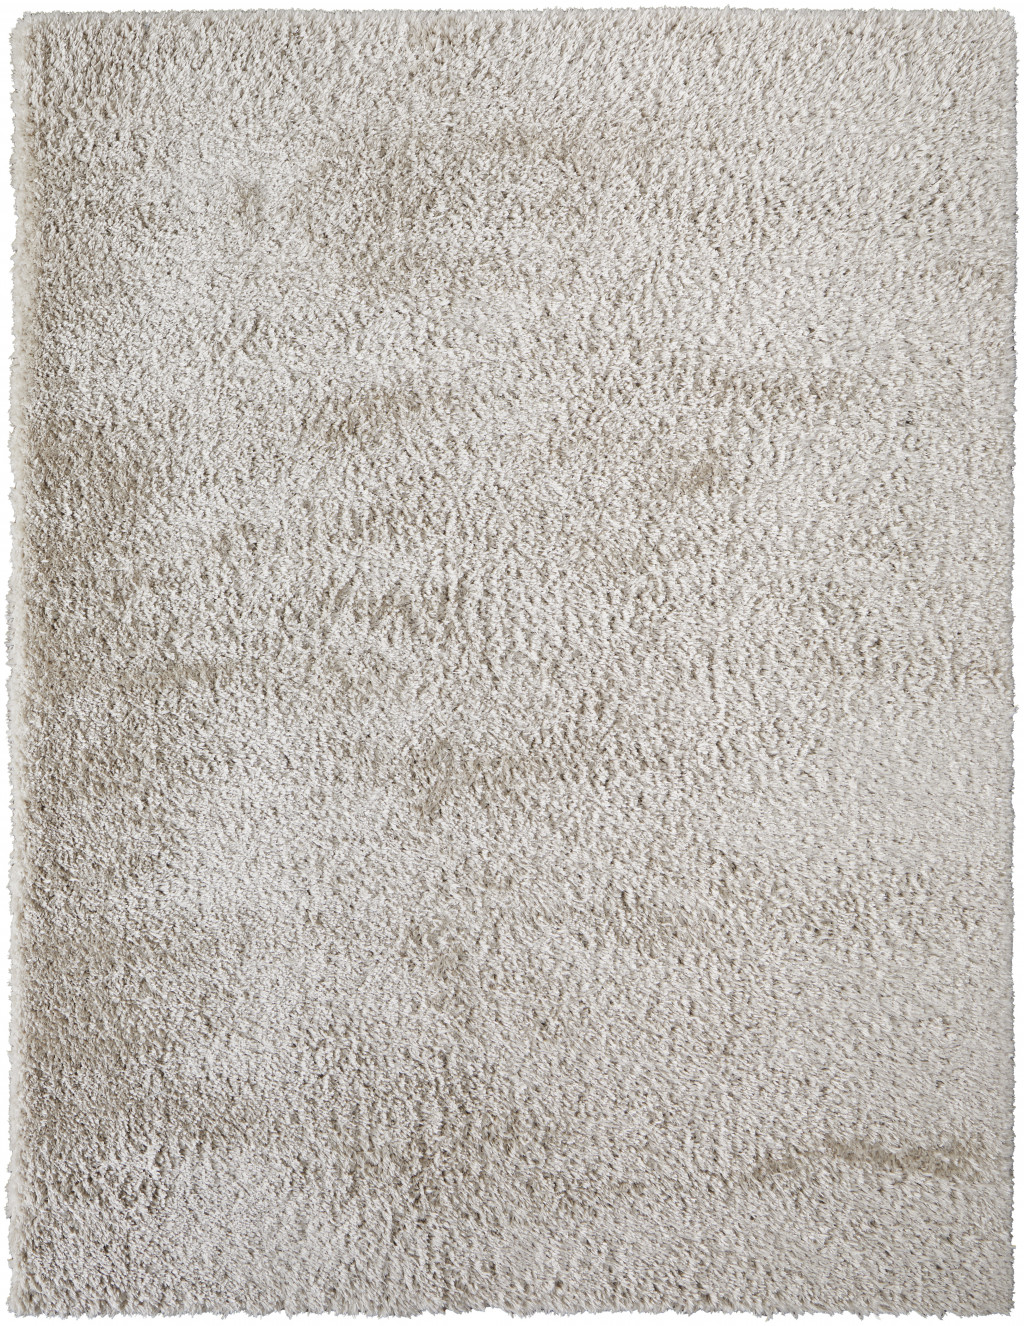 8' X 10' Ivory Shag Power Loom Stain Resistant Area Rug-513416-1